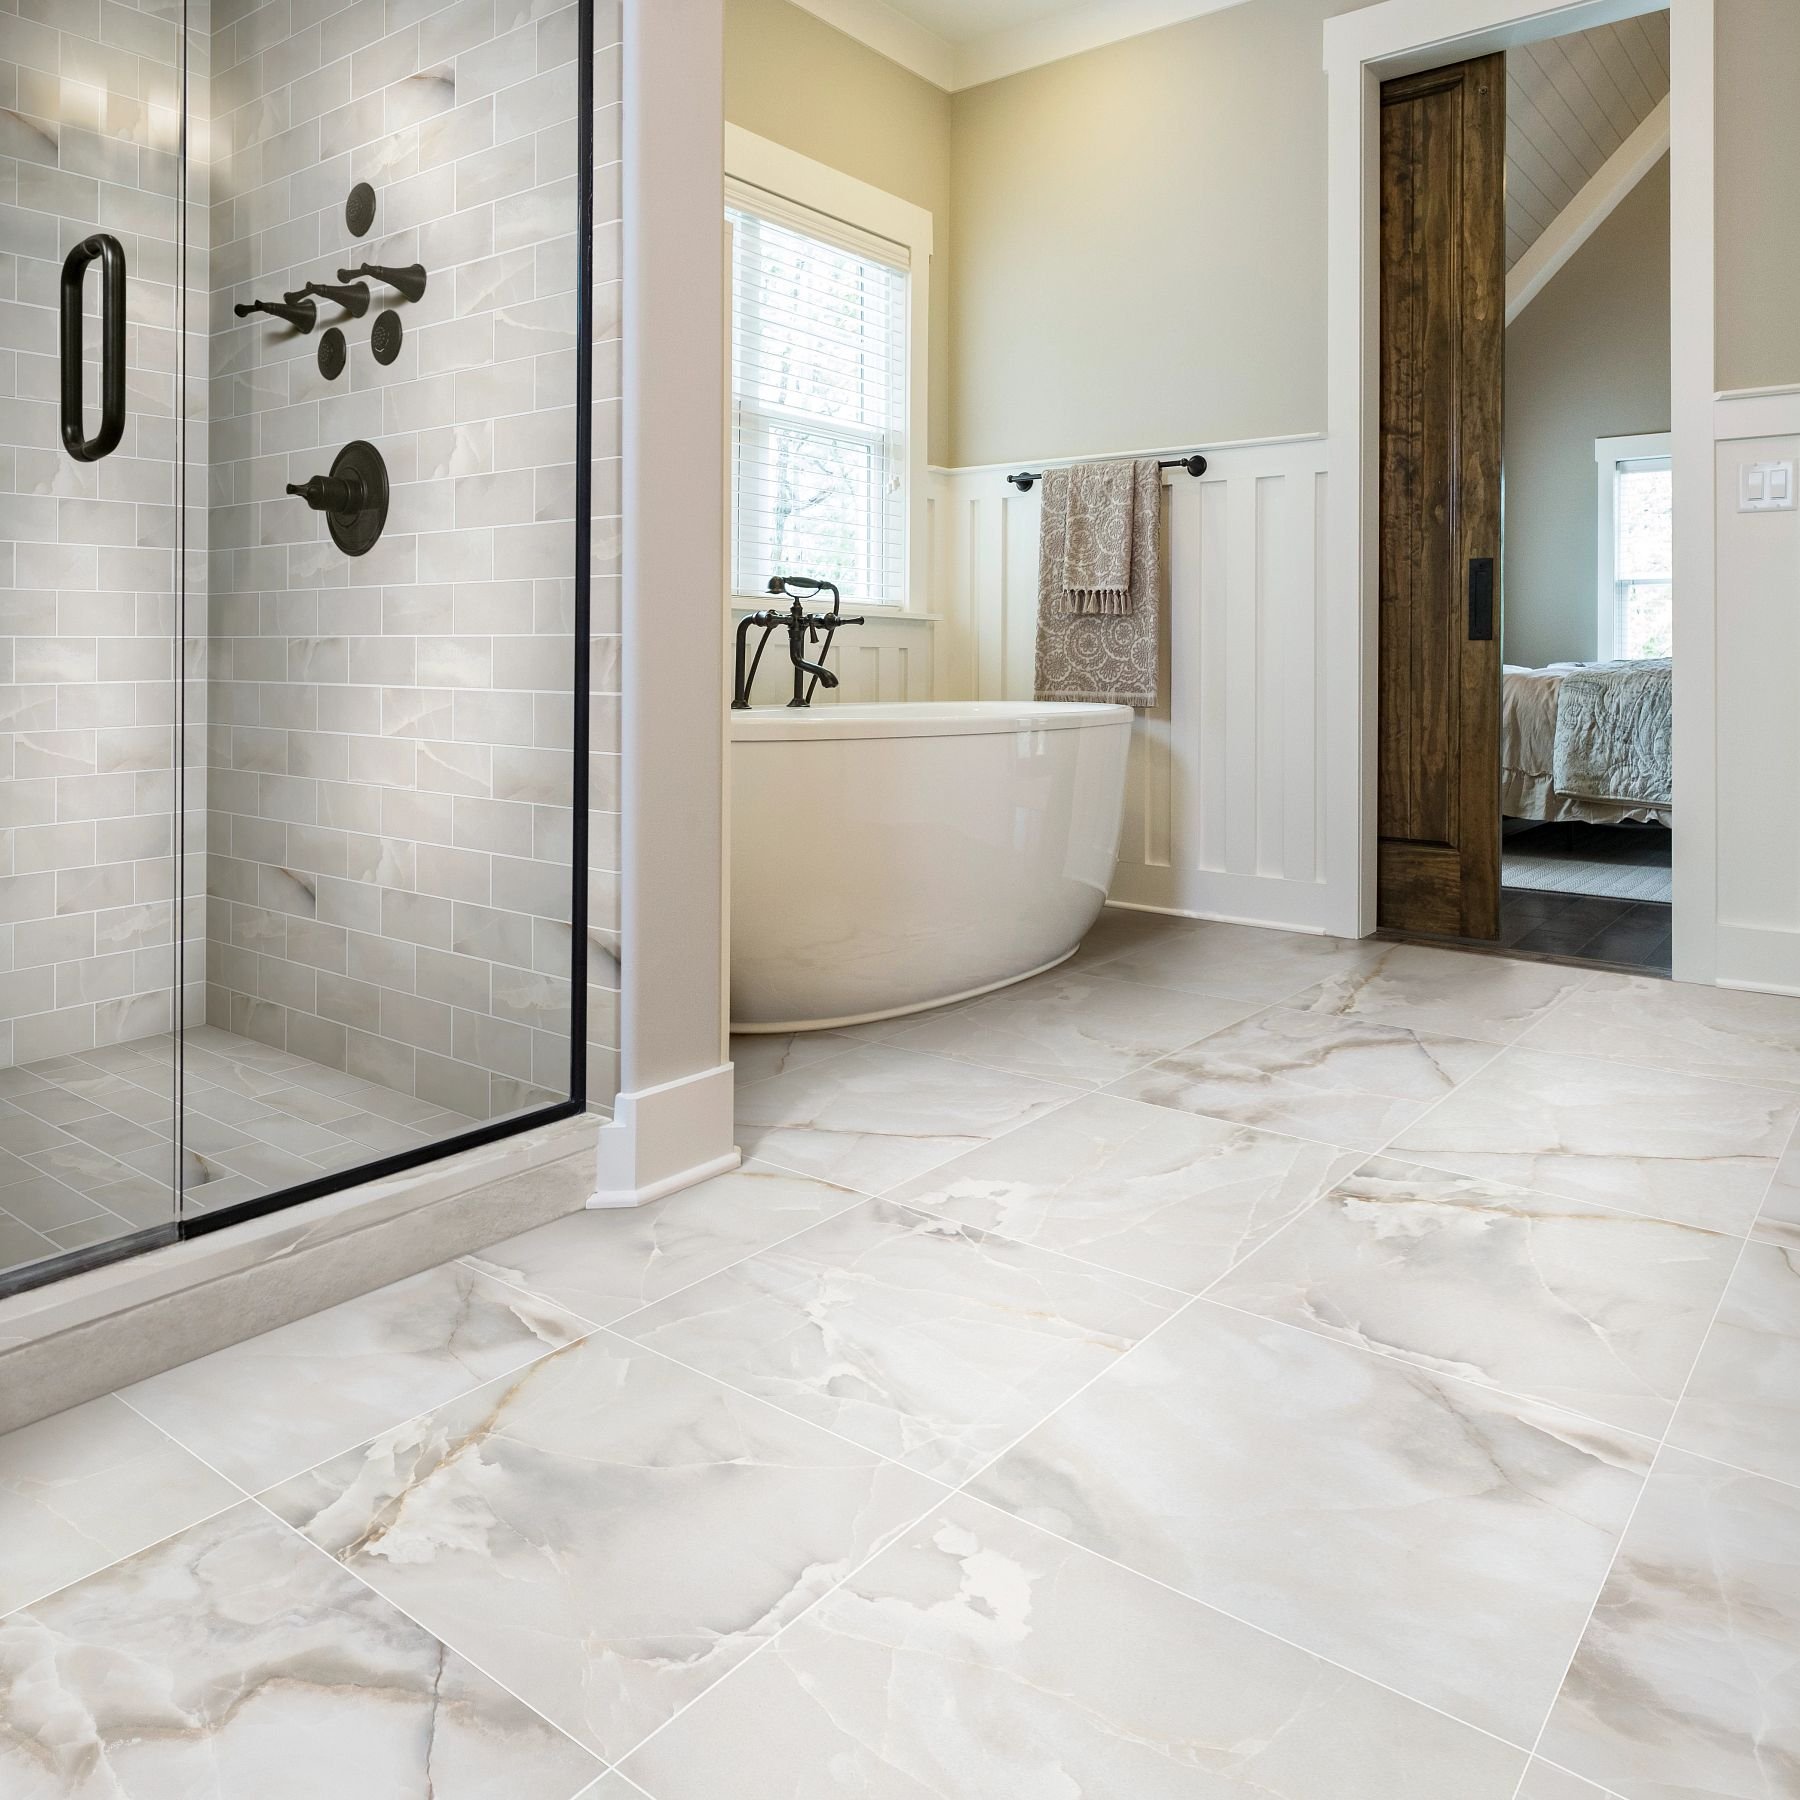 Benefits Of Tile & Stone Flooring Articles By Carpet City Inc & Shaw Floors